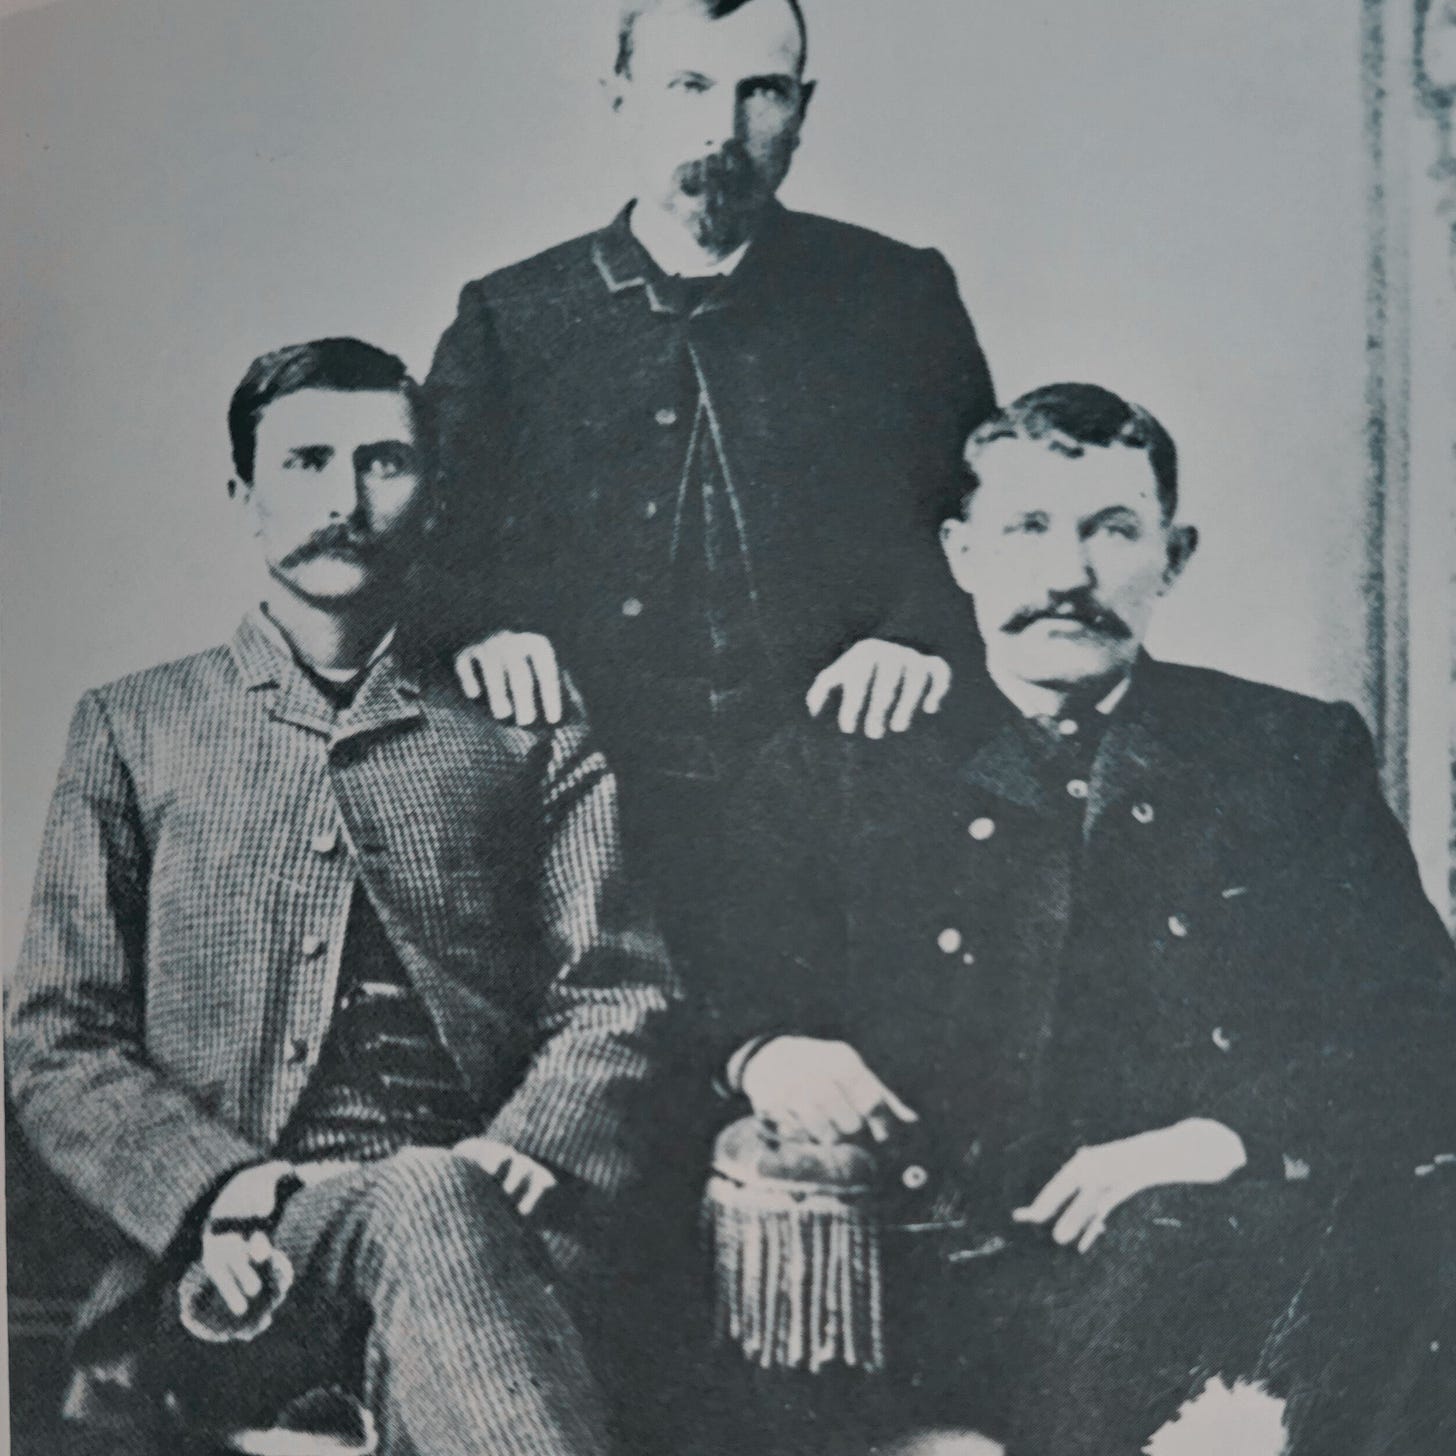 A photo of Pat Garrett and two other Lincoln County Sheriffs